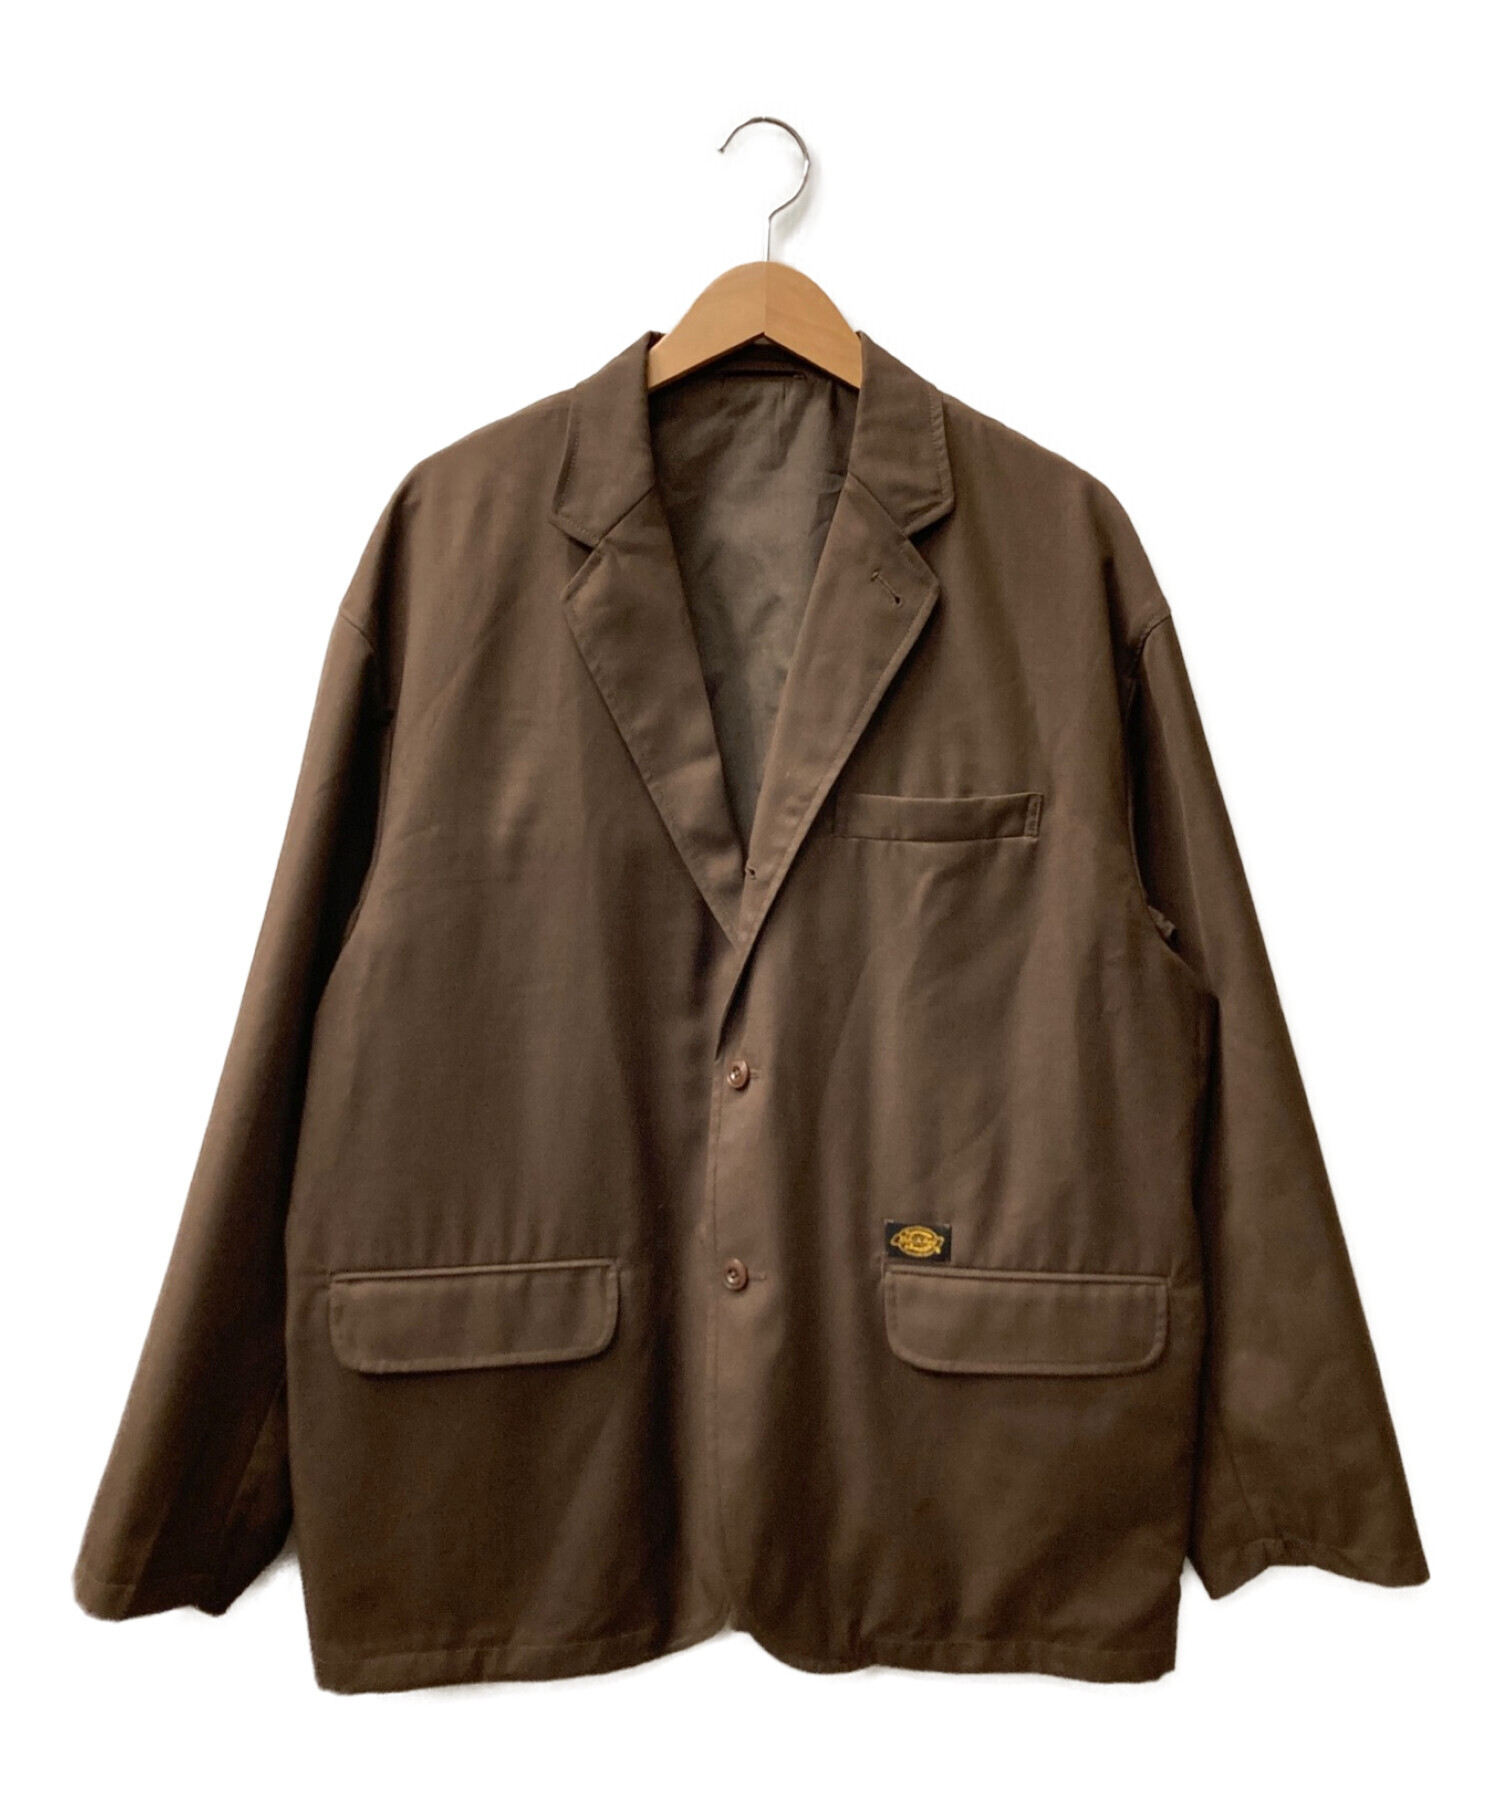 Dickies×Tripster Beams セットアップ | nate-hospital.com